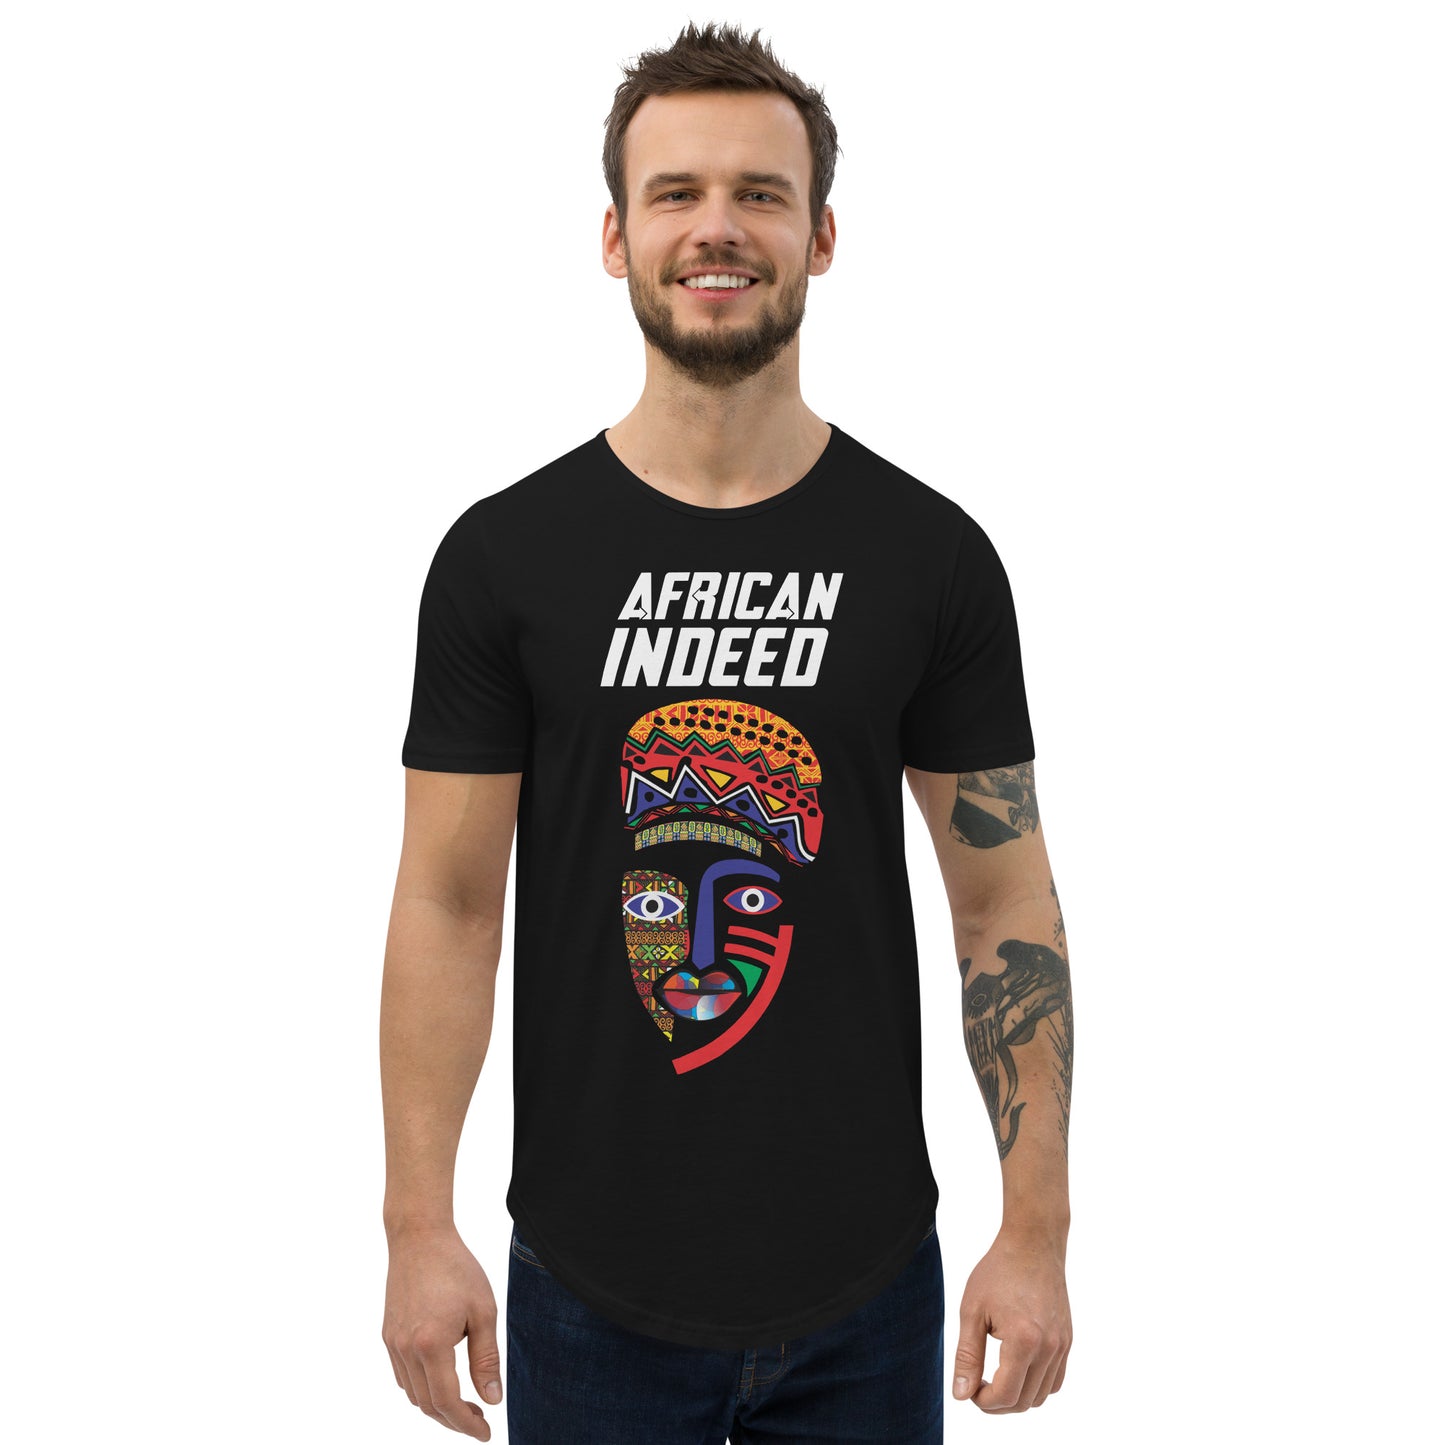 African Indeed Rounded Hem T-Shirt